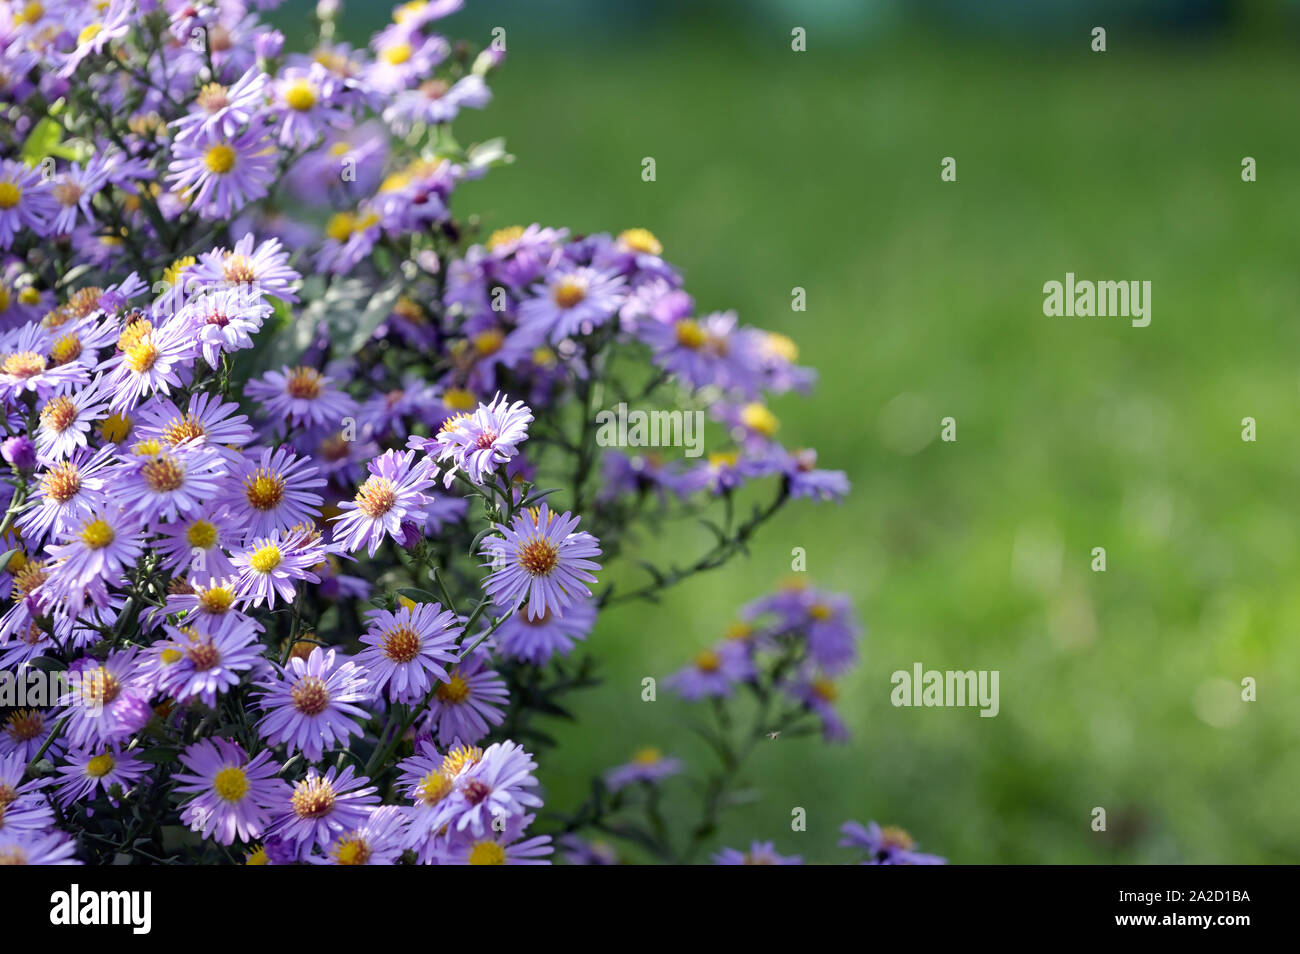 Aster Little Carlow High Resolution Stock Photography And Images Alamy